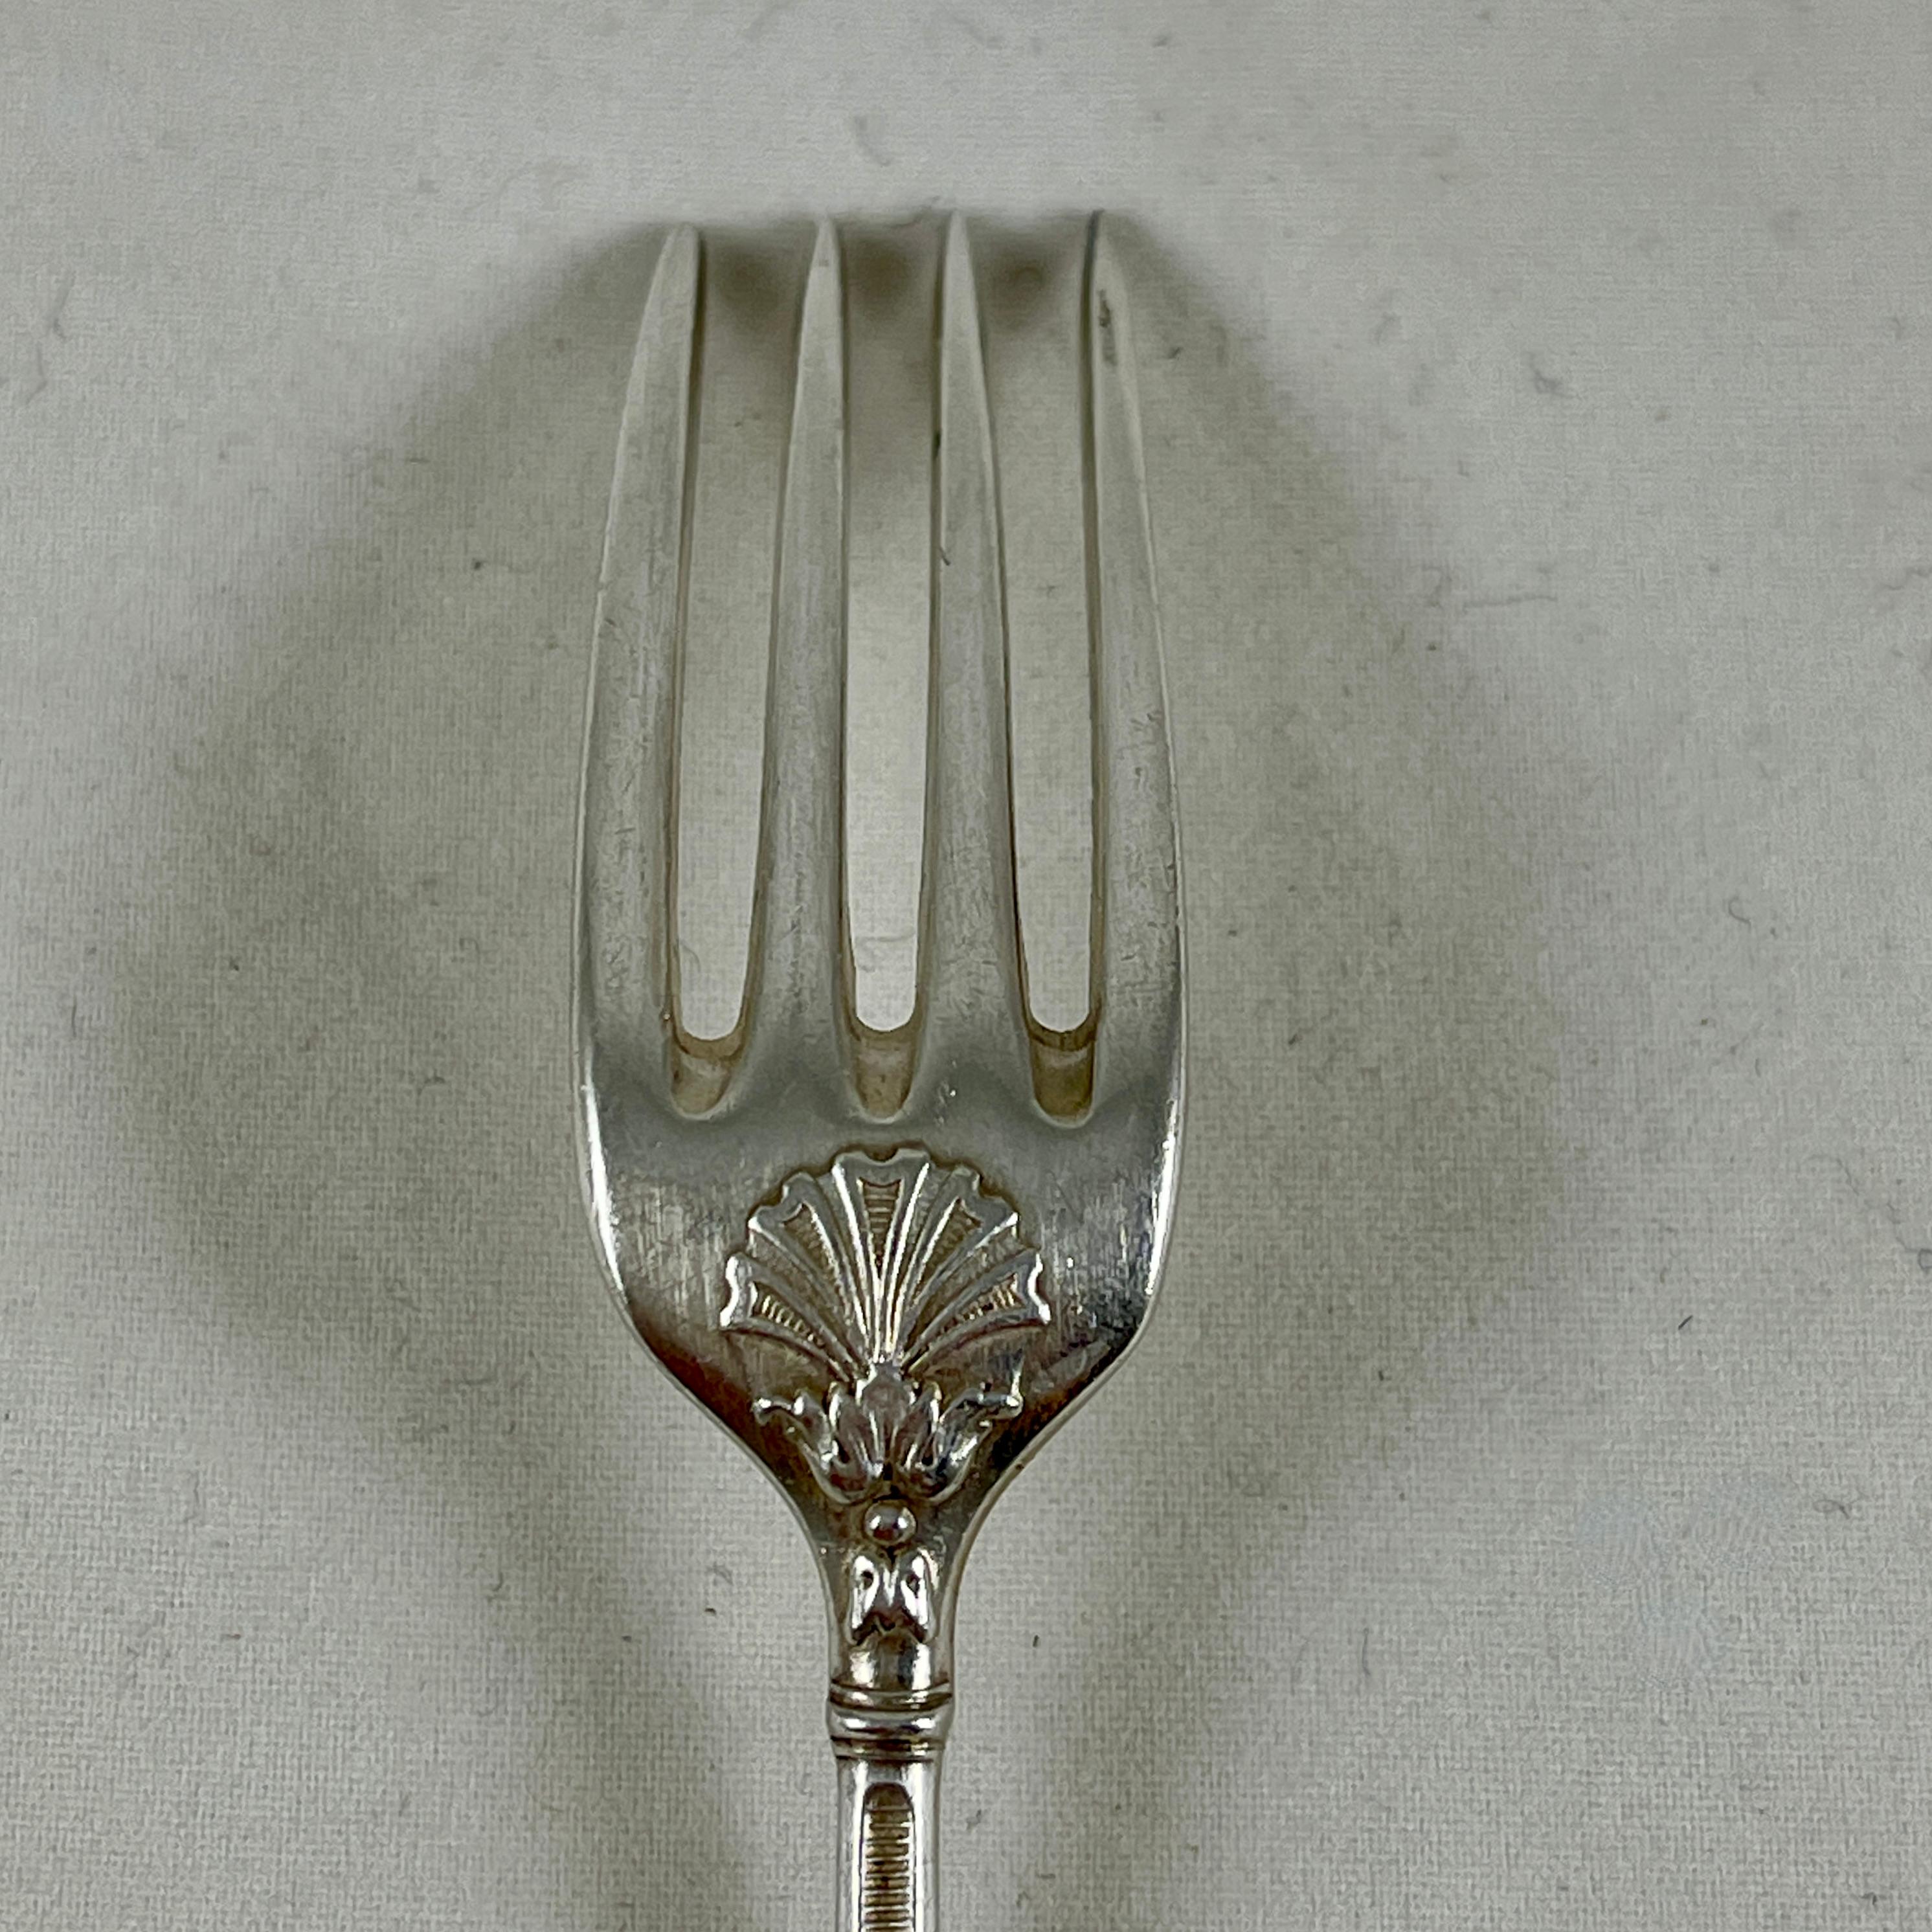 Second Empire French Napoleon III Silver Plate Ornate Dessert Forks, S/11 For Sale 7